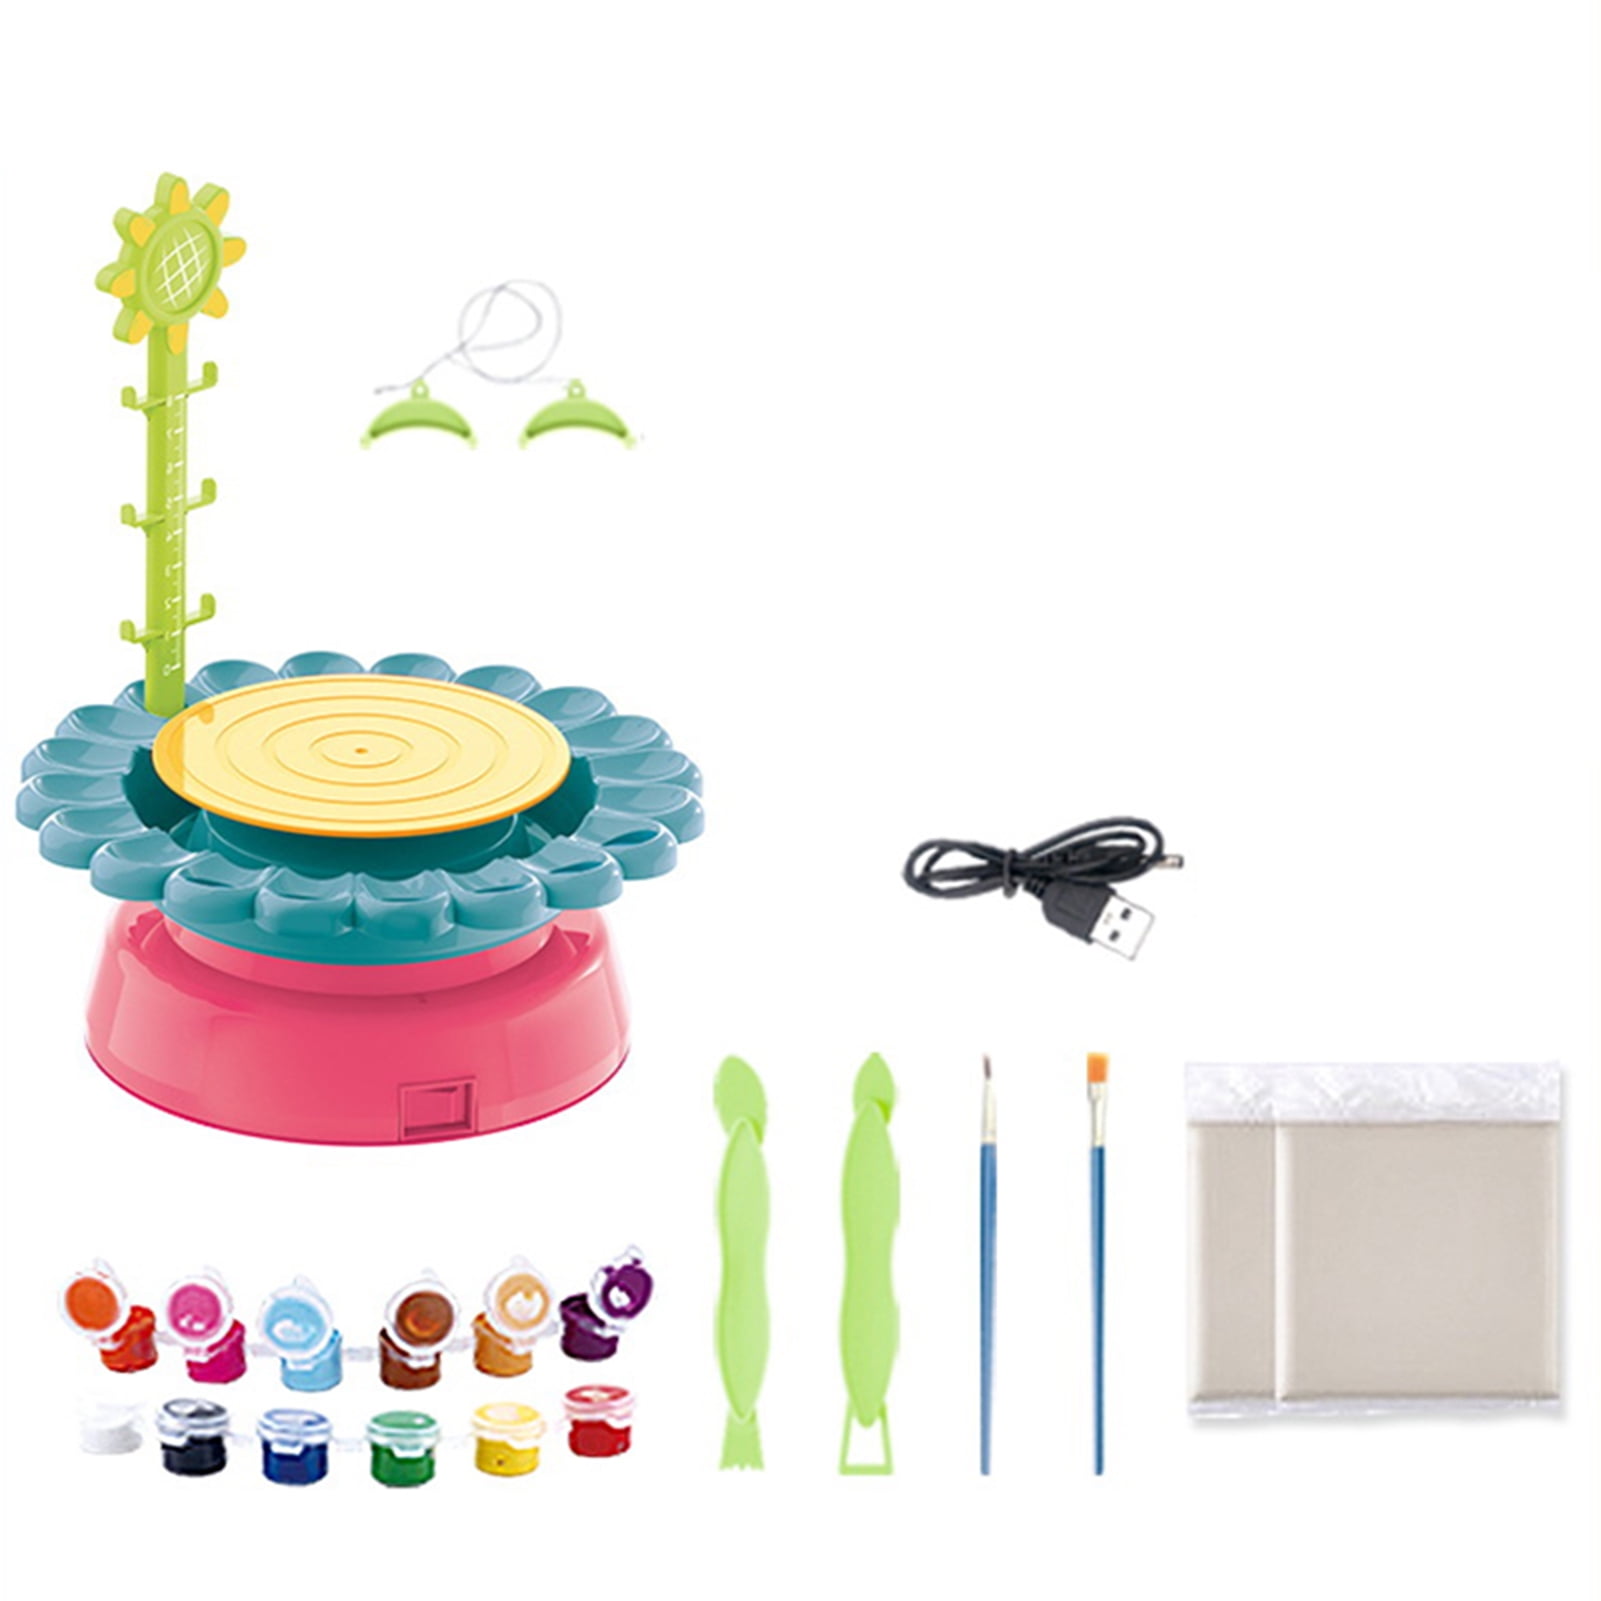 Details about   Machine Ceramic Kit Craft Kit for Children Kids Beginners Home Toy Without Clay 